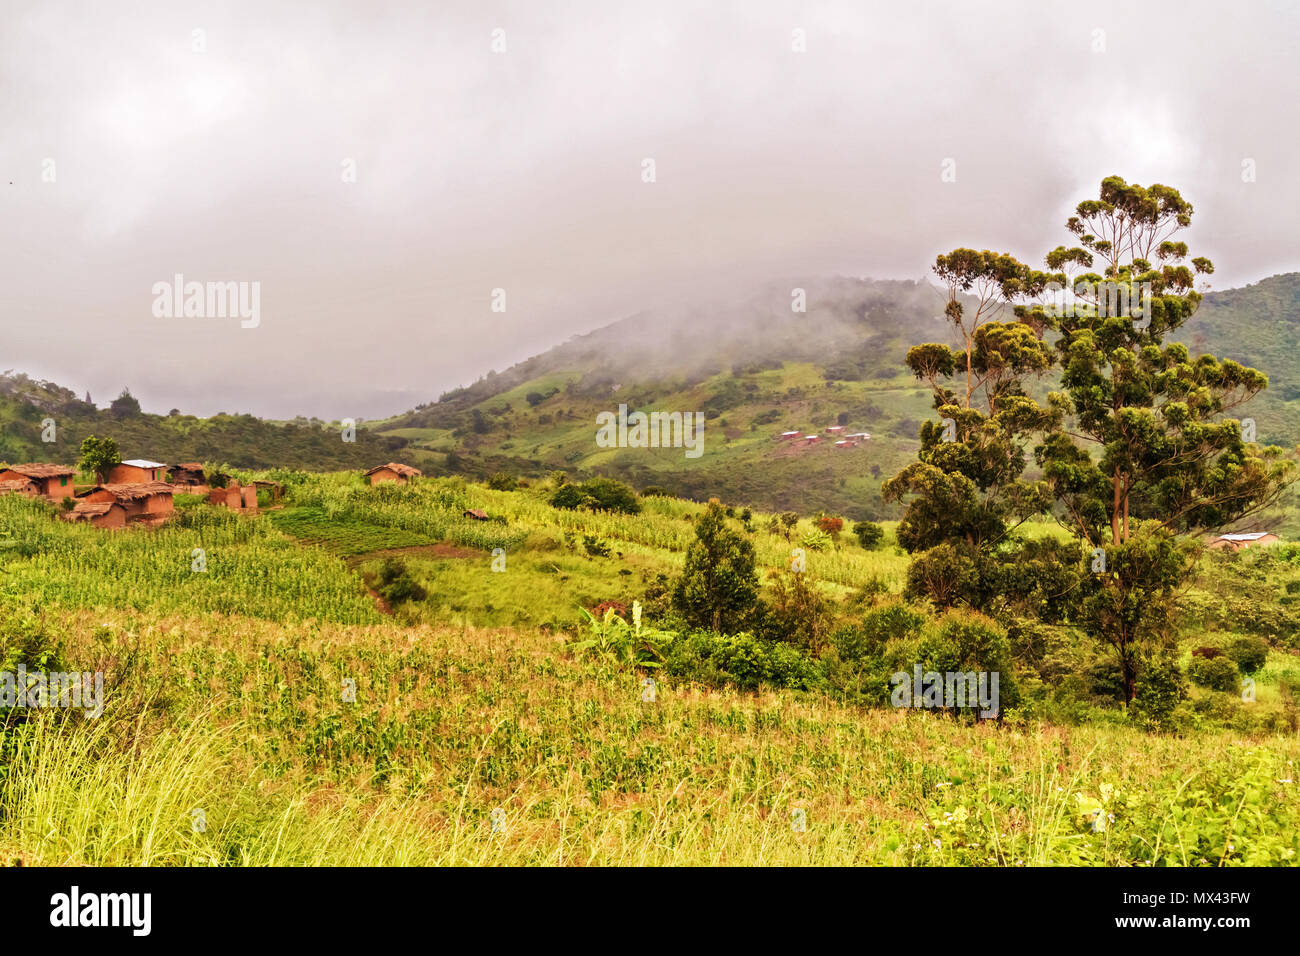 Scenic rural landscape from the road near Mzuzu in Malawi Stock Photo